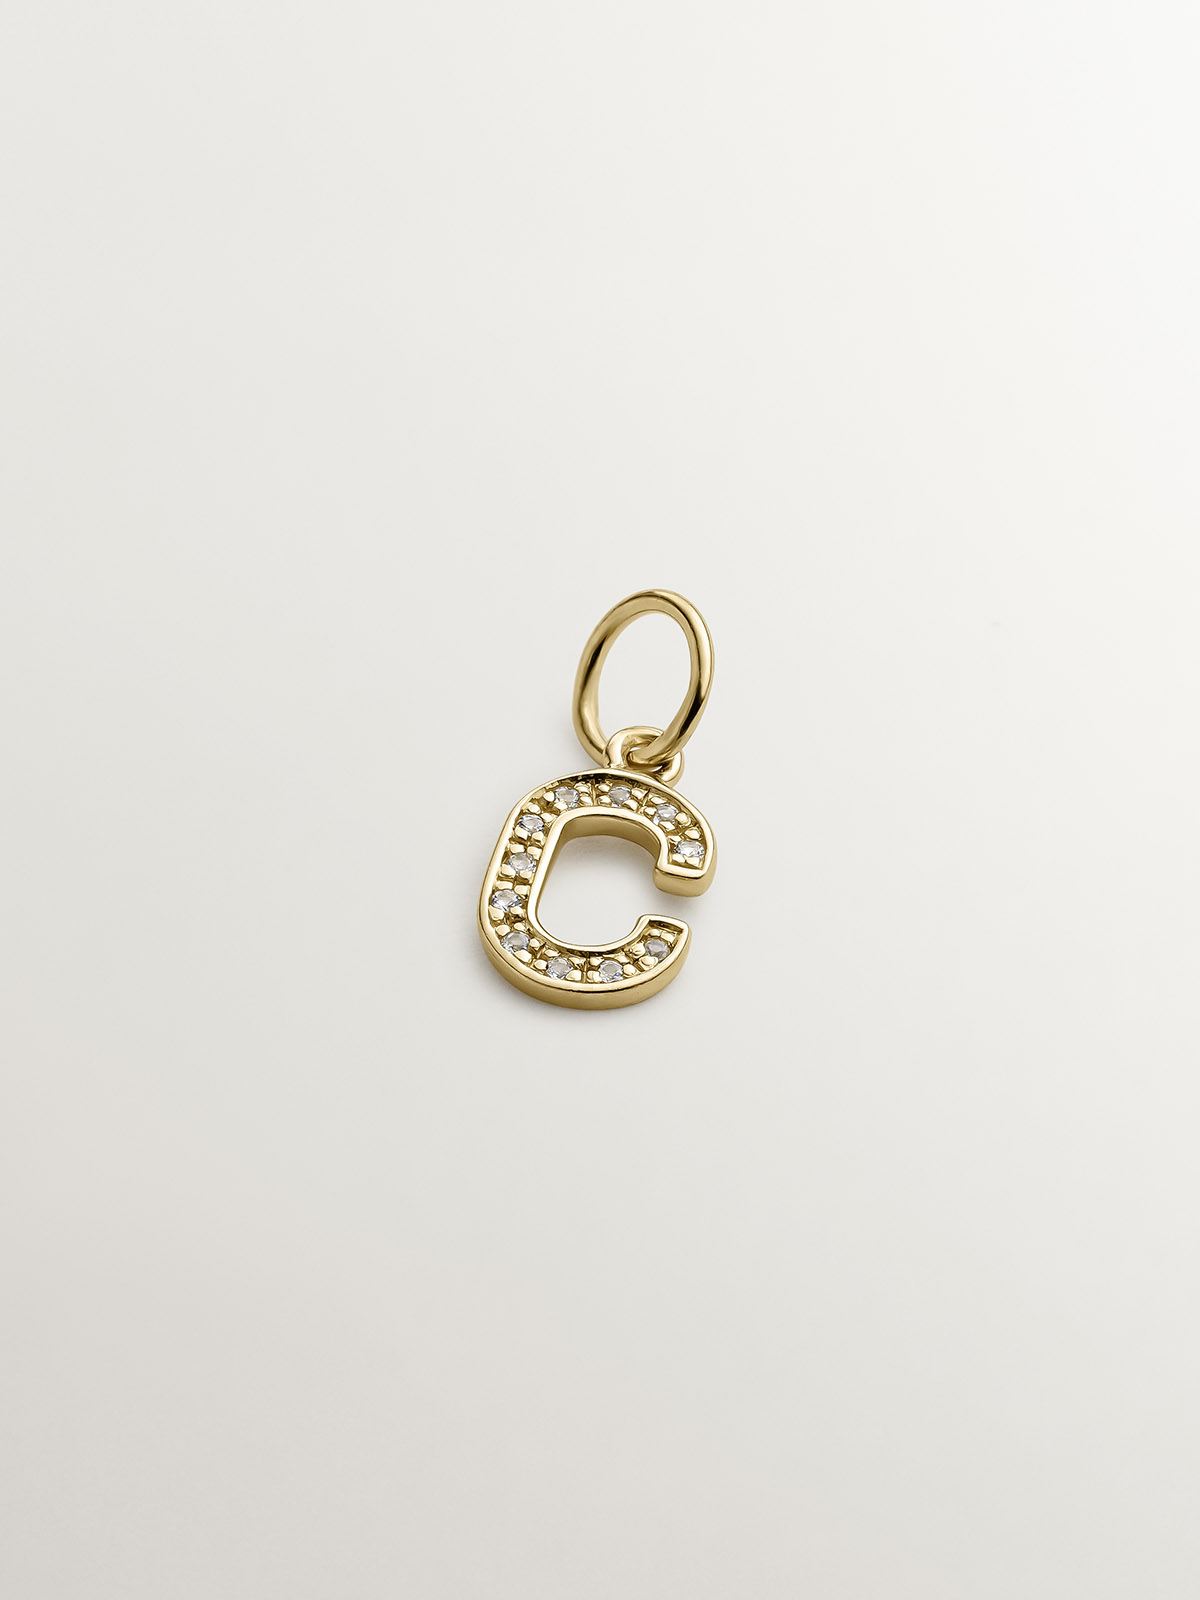 925 Silver Charm plated in 18K Yellow Gold with white topaz, initial C.